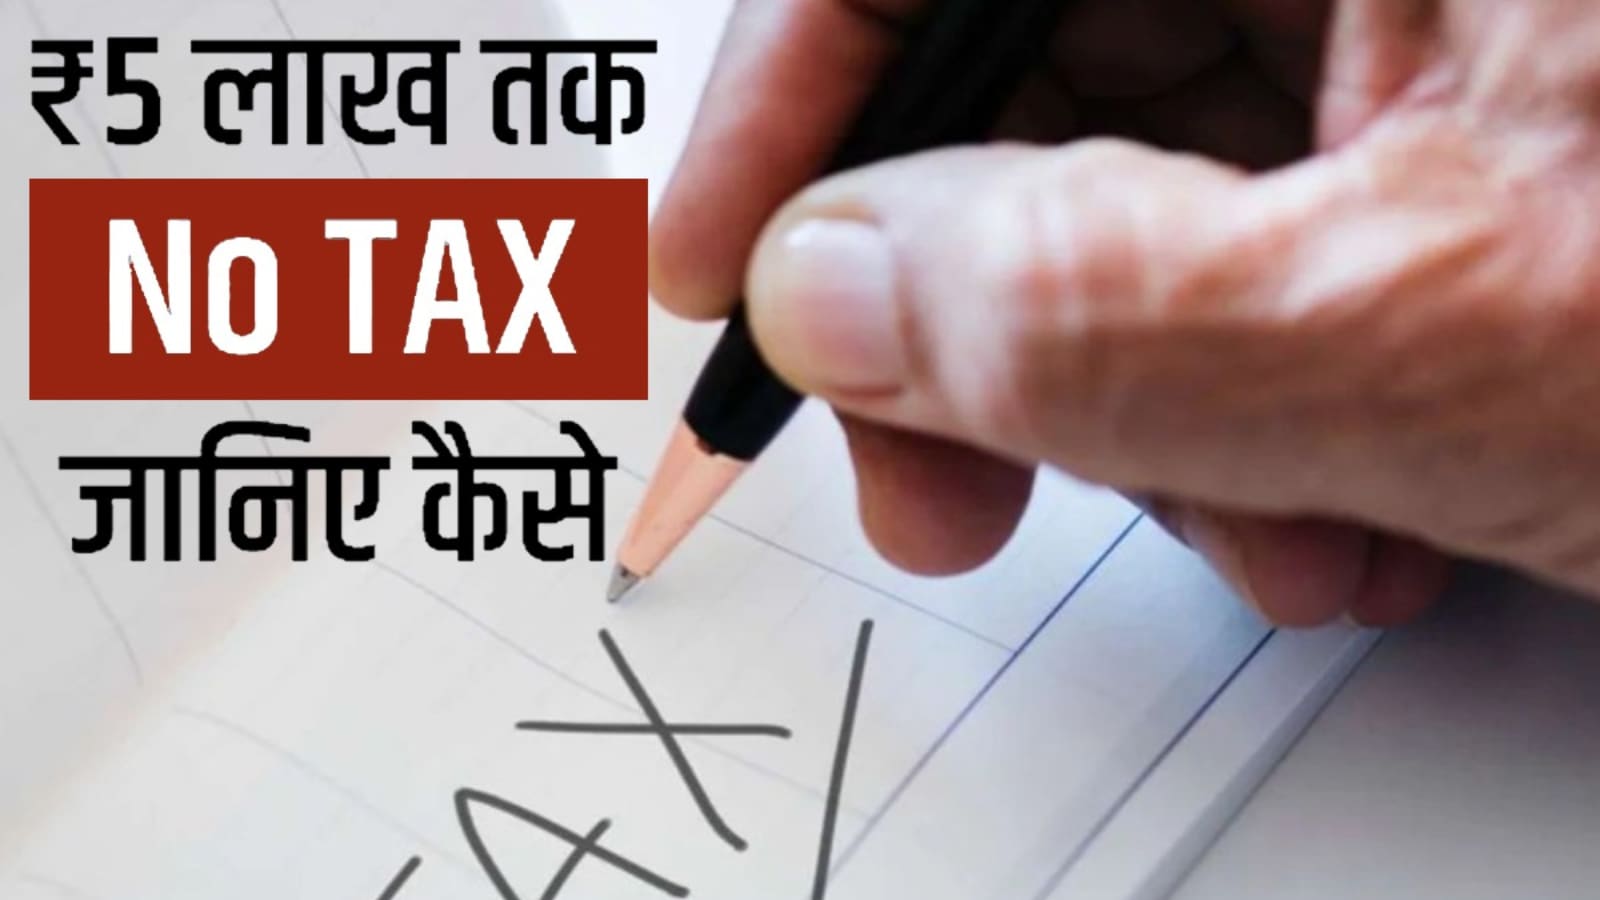 budget-2019-govt-may-double-income-tax-exemption-limit-to-rs-5-lakh